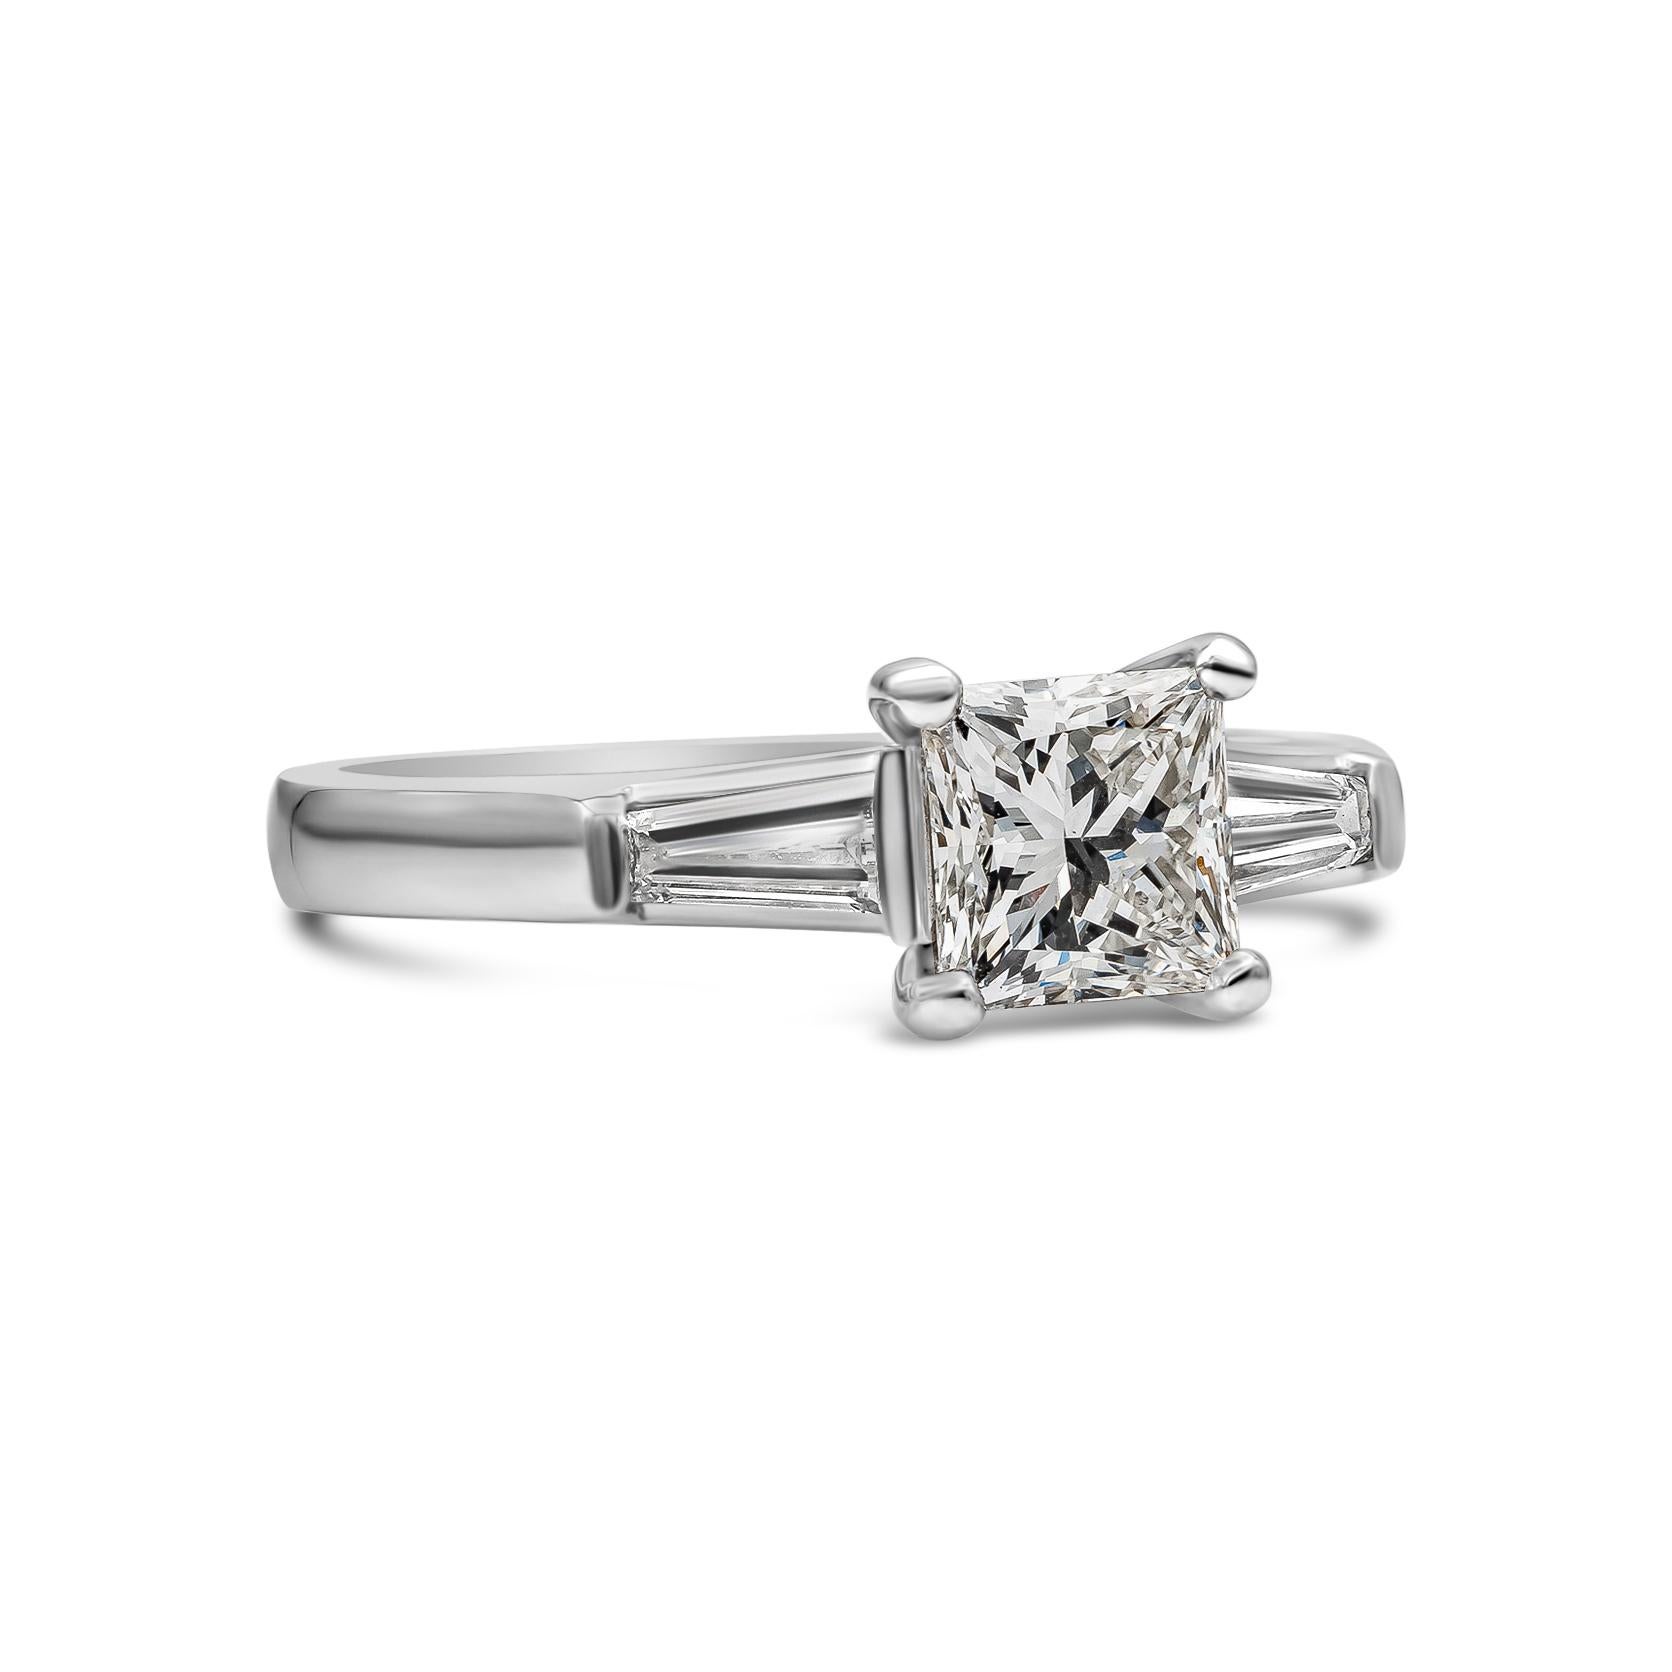 This simply and classy three-stone engagement ring Features a 1.04 carats princess cut diamond certified by GIA as I color, VS2 in clarity, flanked by two tapered baguette diamonds on either side weighing 0.33 carats total. Set in a polished